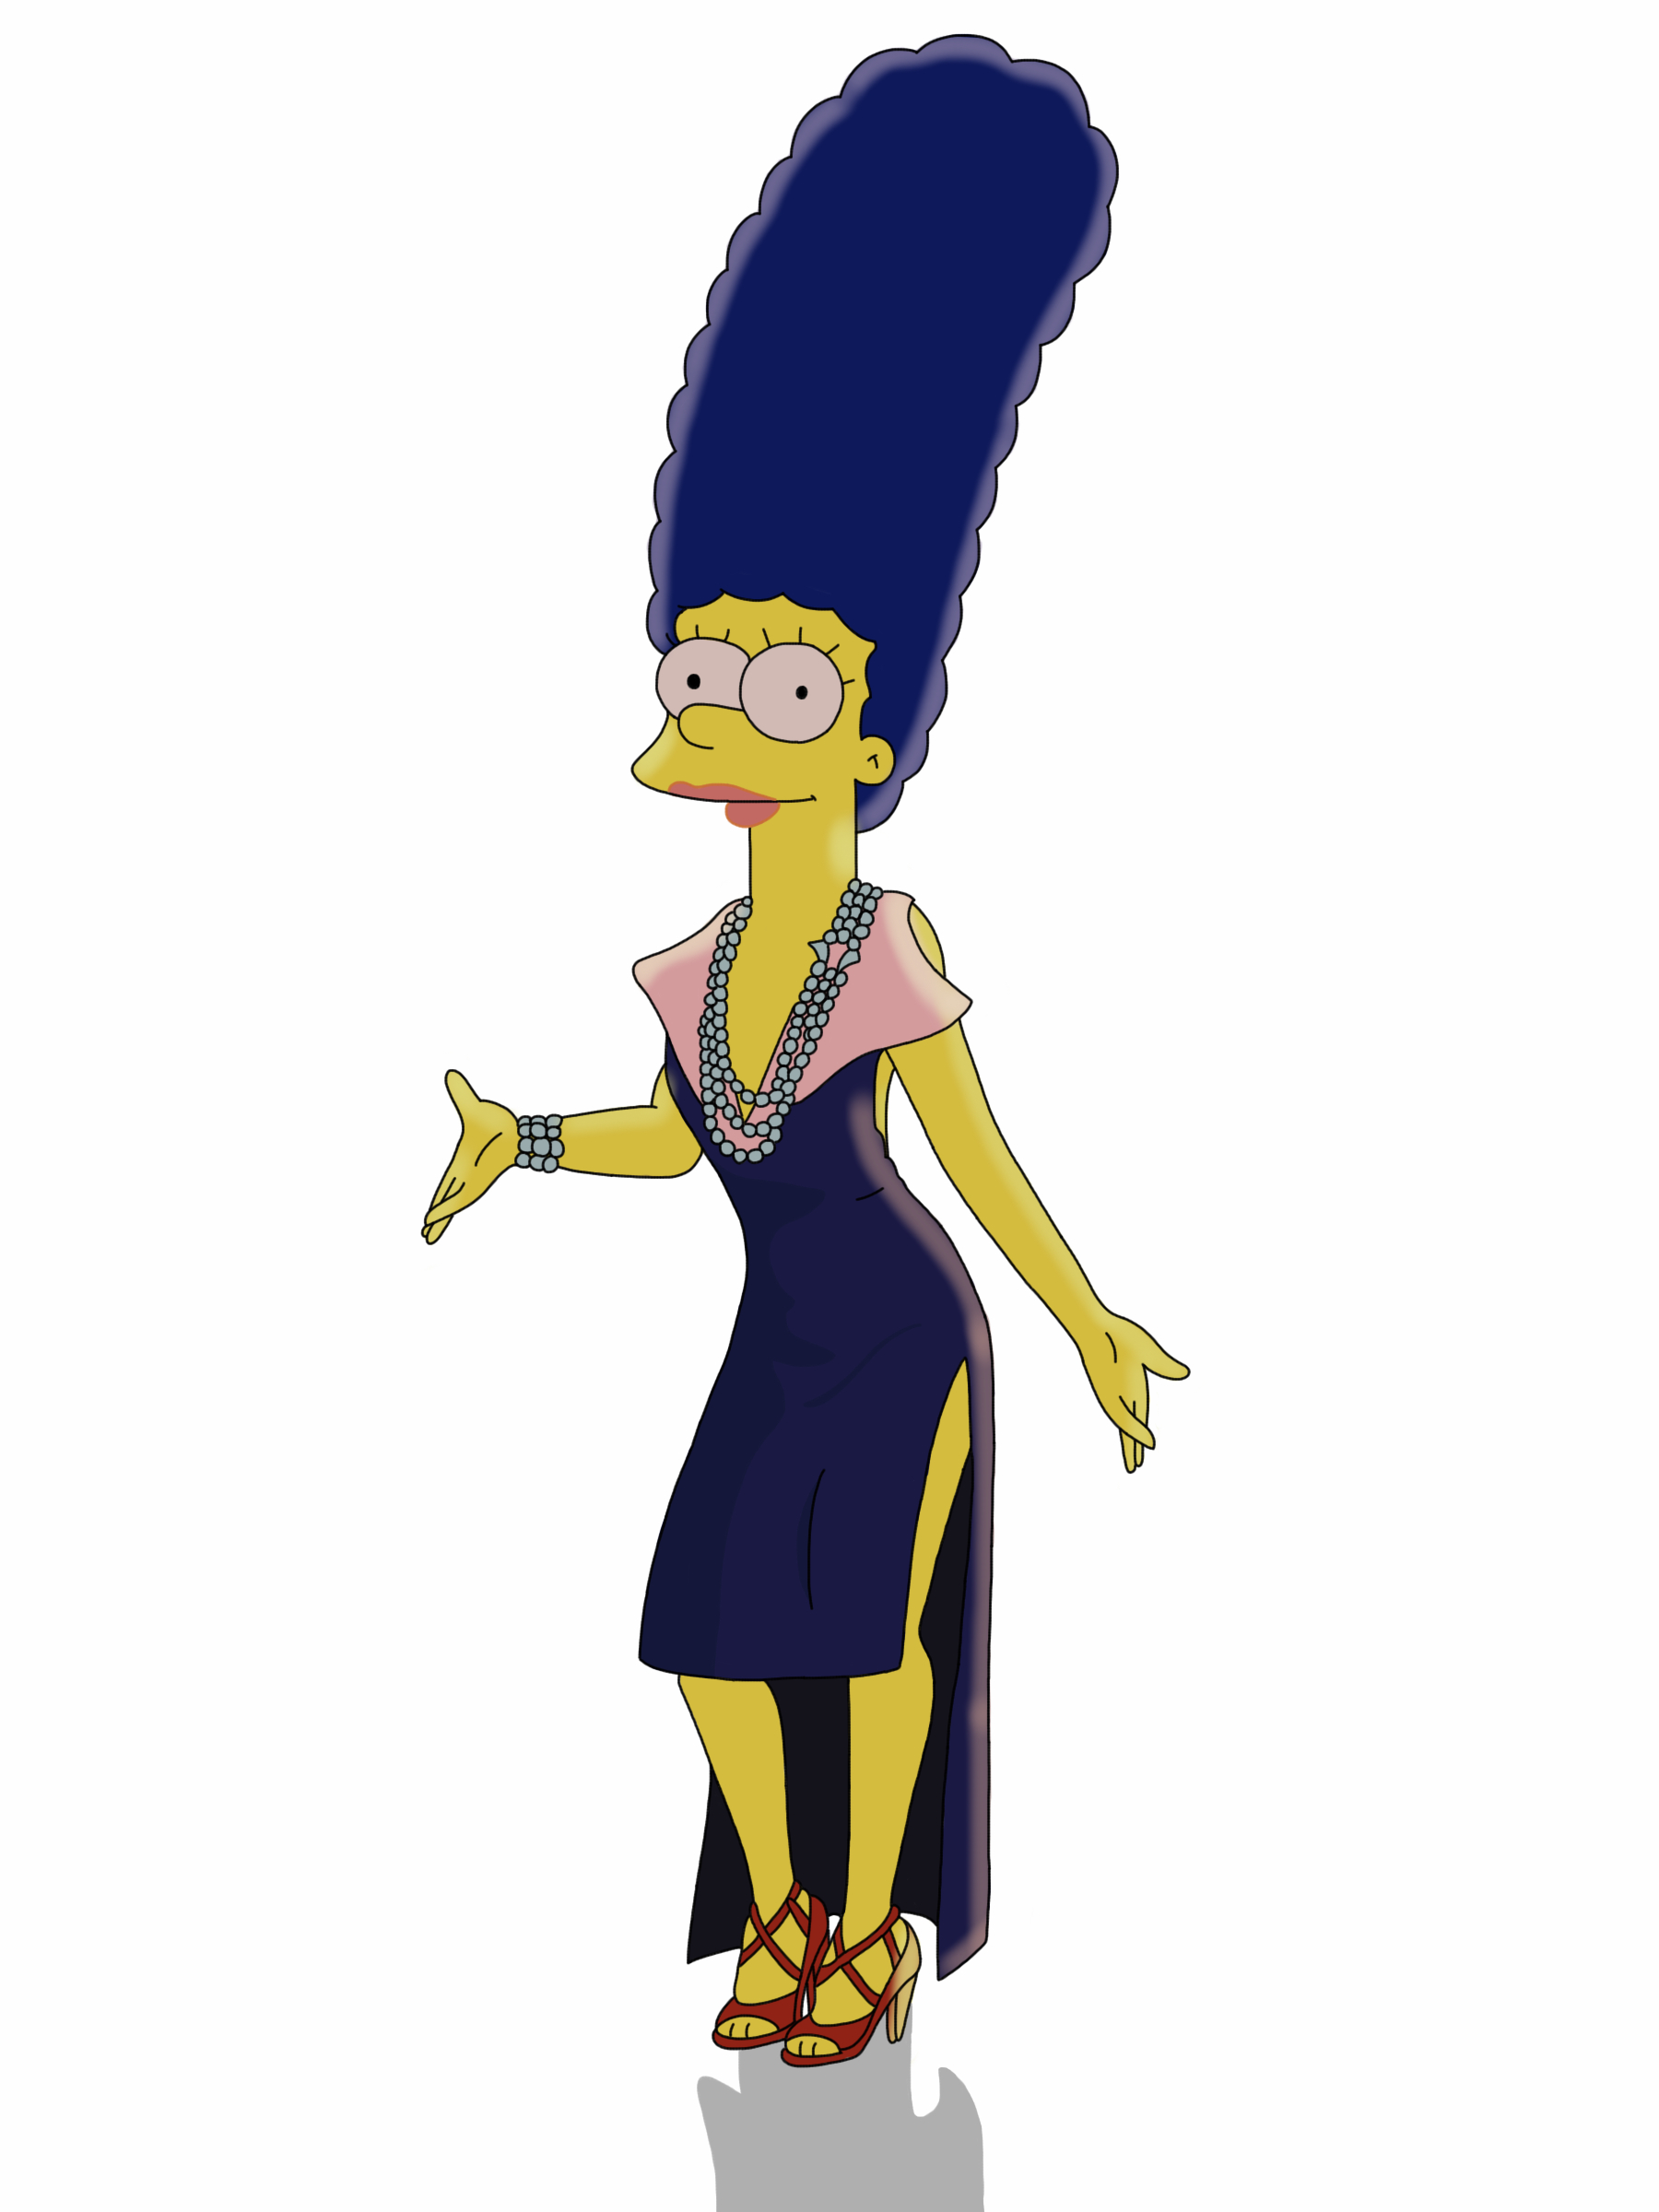 Marge Simpson 3 By Spartandragon12 On DeviantArt.